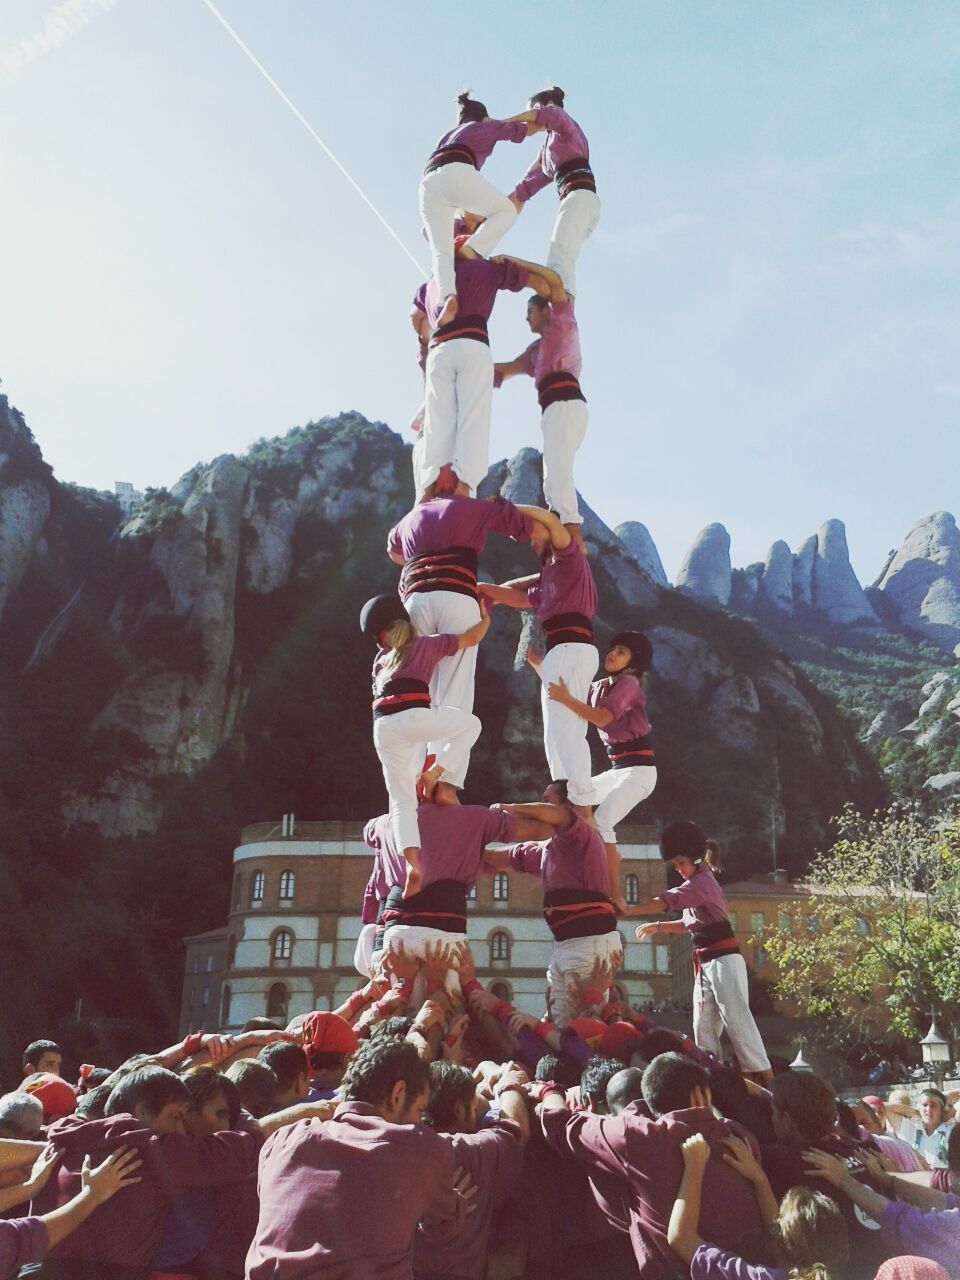 Team climbing to form human pyramid in traditional festival